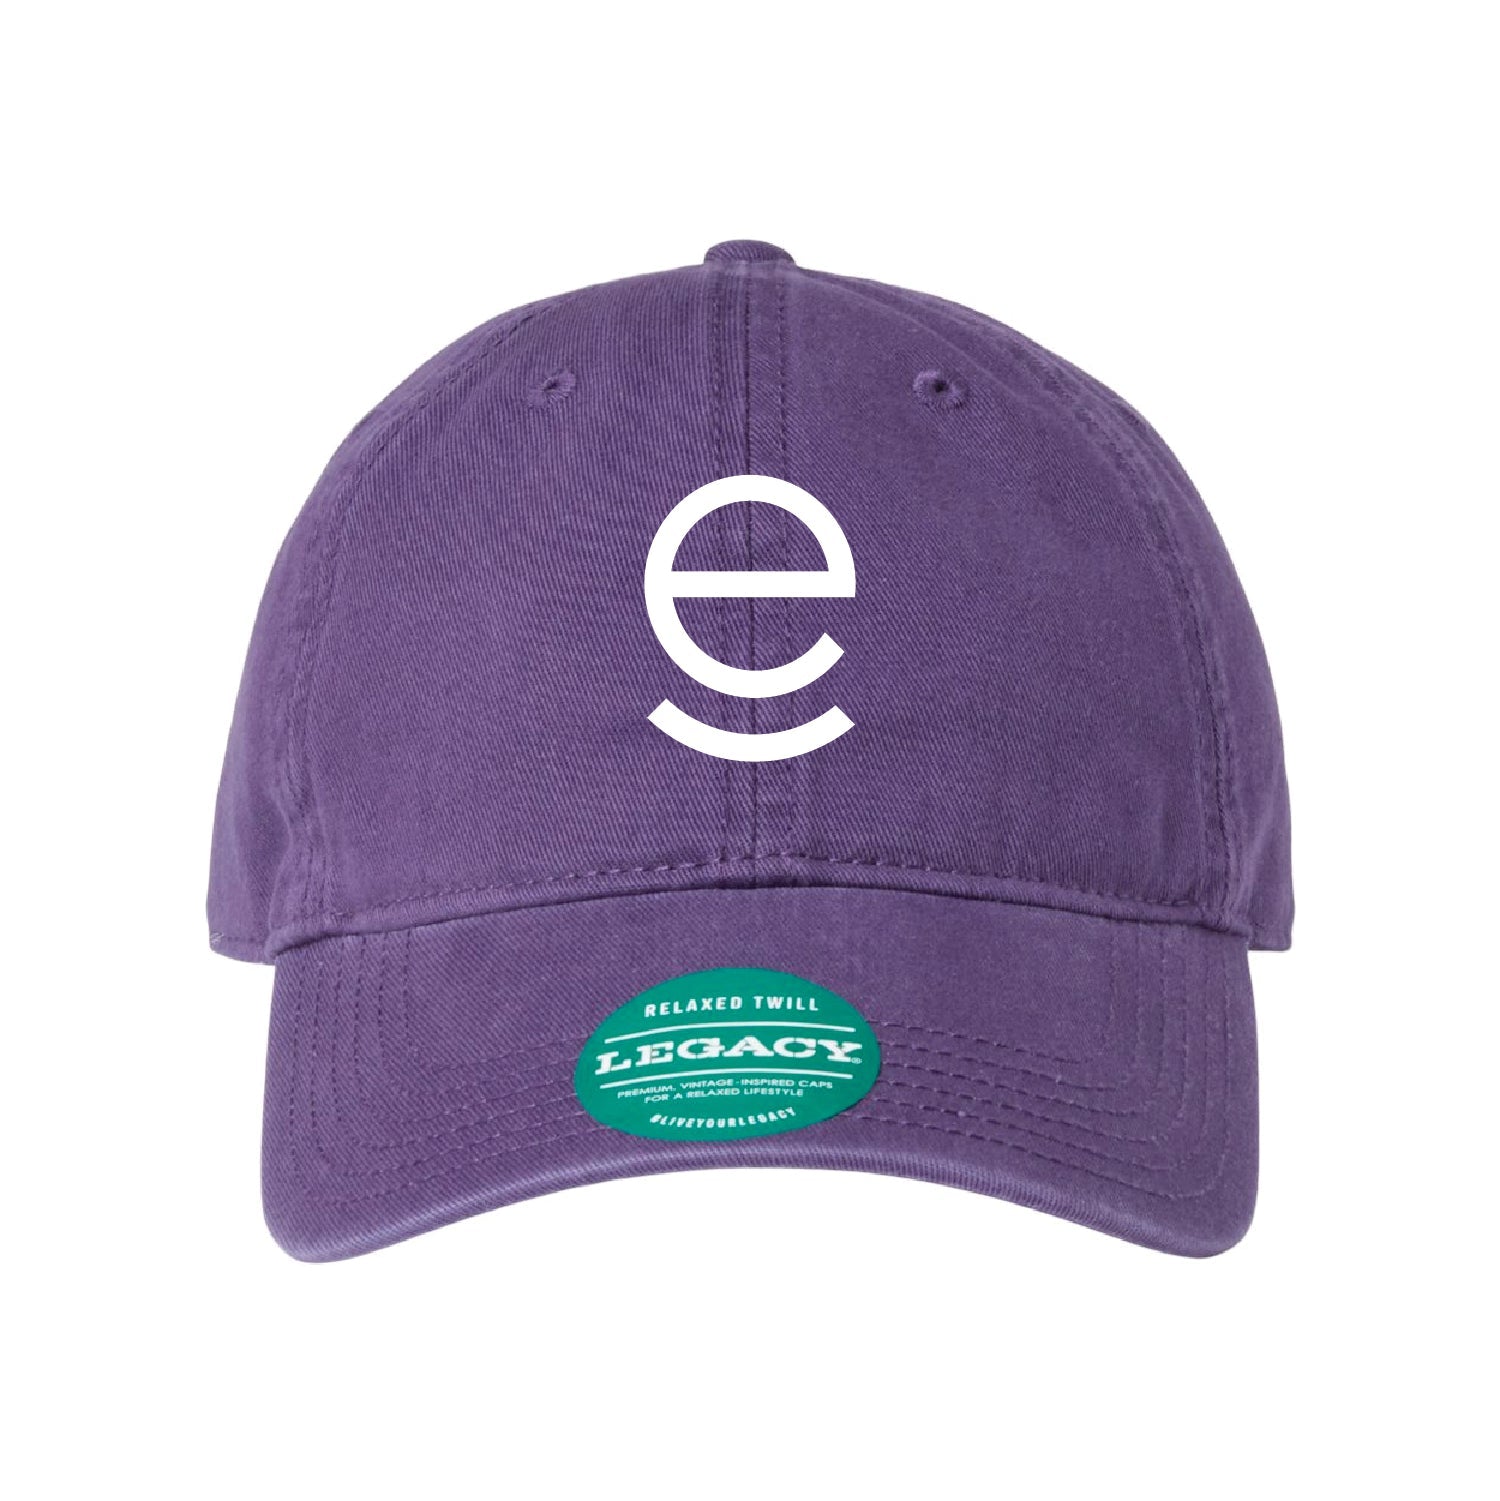 Entrepreneur Fund Relaxed Twill Dad Hat - DSP On Demand